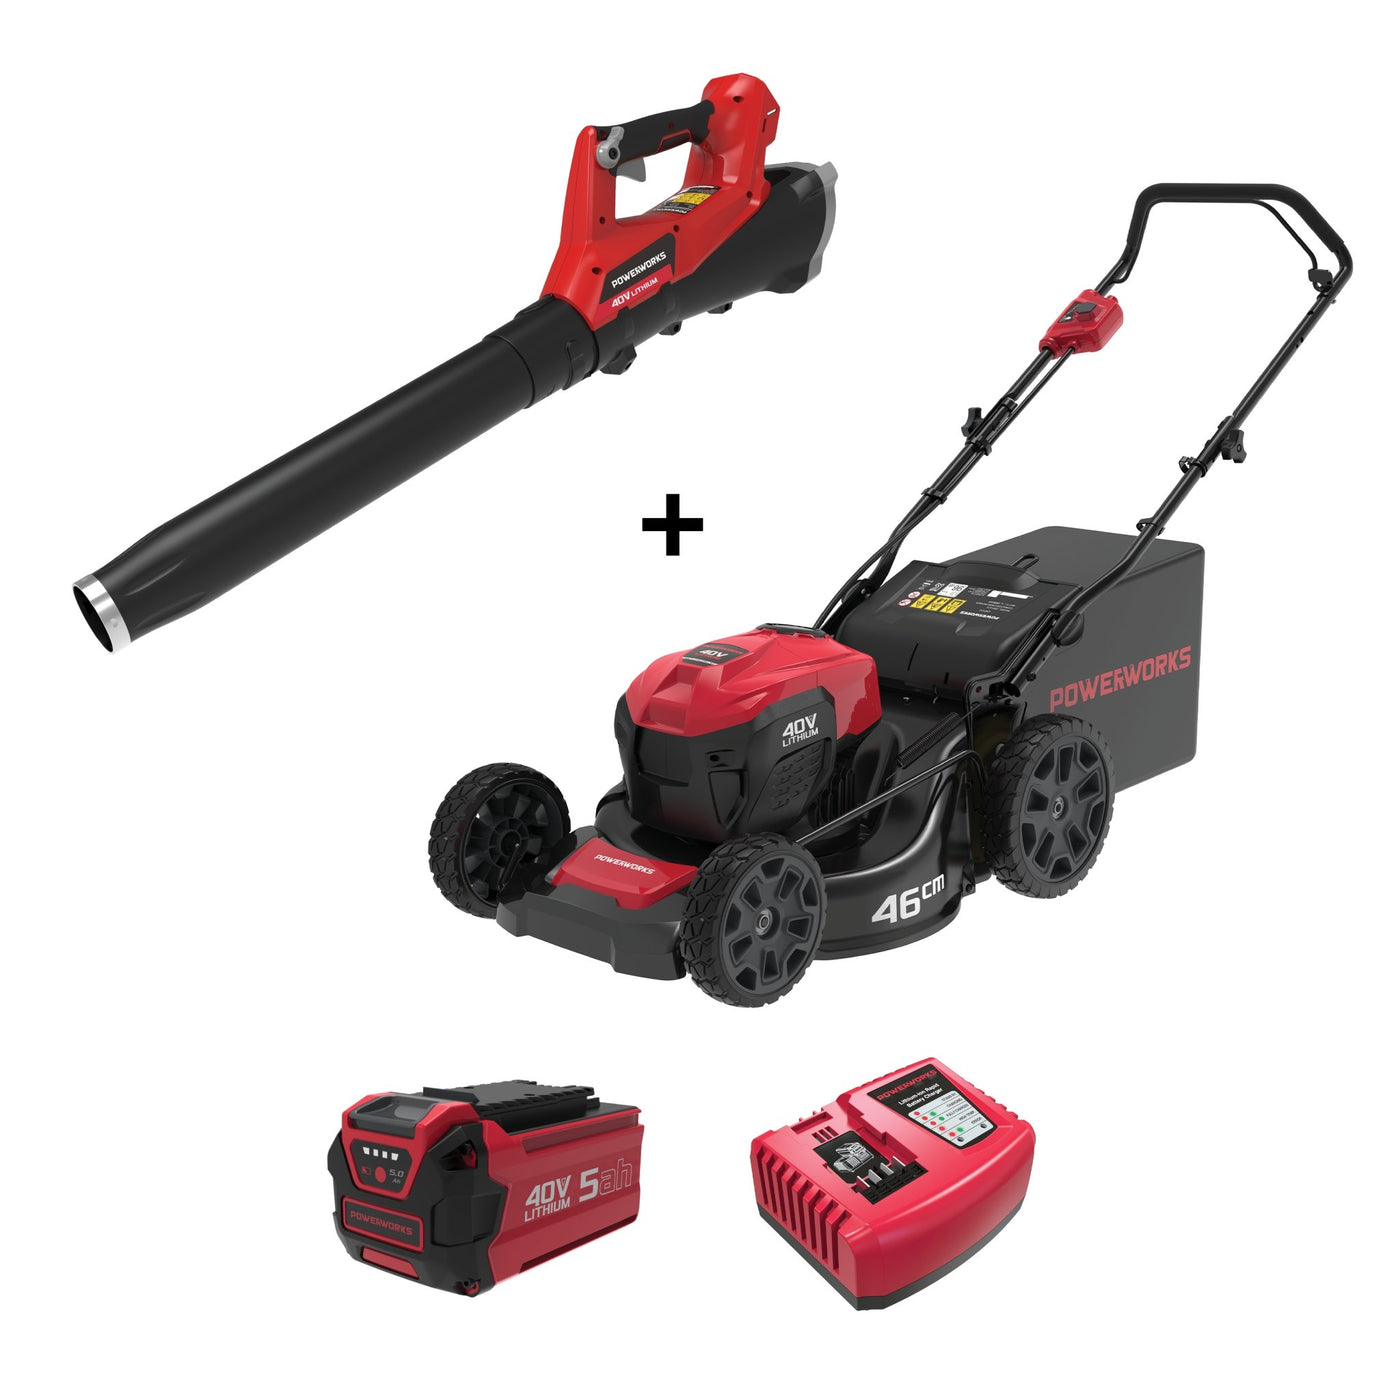 Powerworks 40V HP lawnmower and axial blower combo - Solo New Zealand